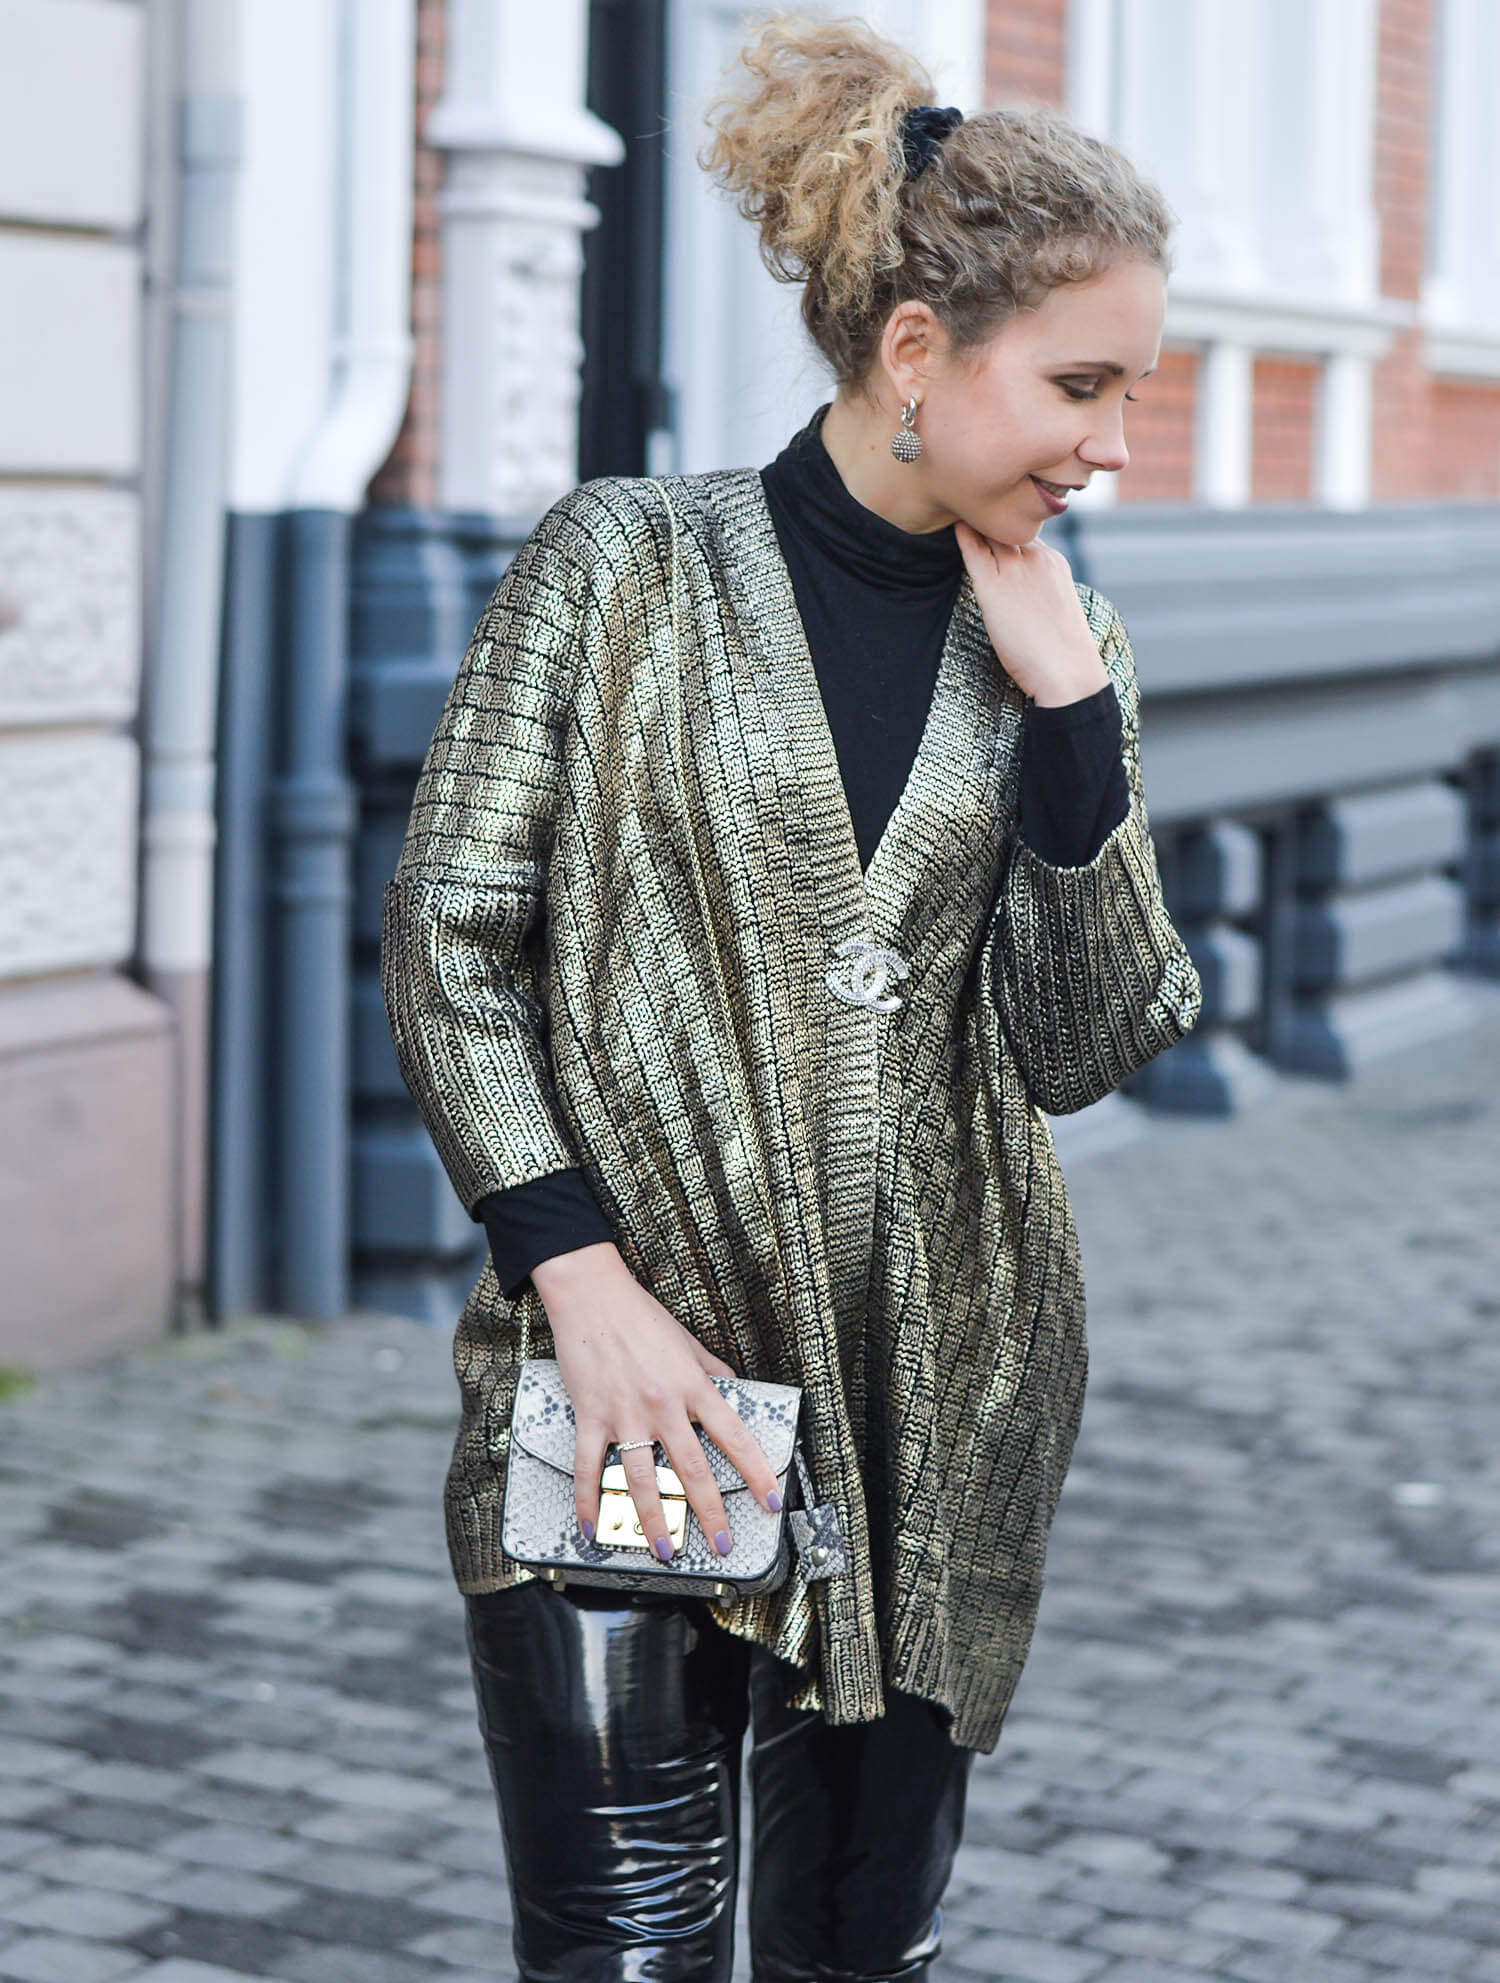 Kationette-fashionblogger-outfit-Outfit-Black-and-Gold-Golden-Knit-and-Vinylpants-streetstyle